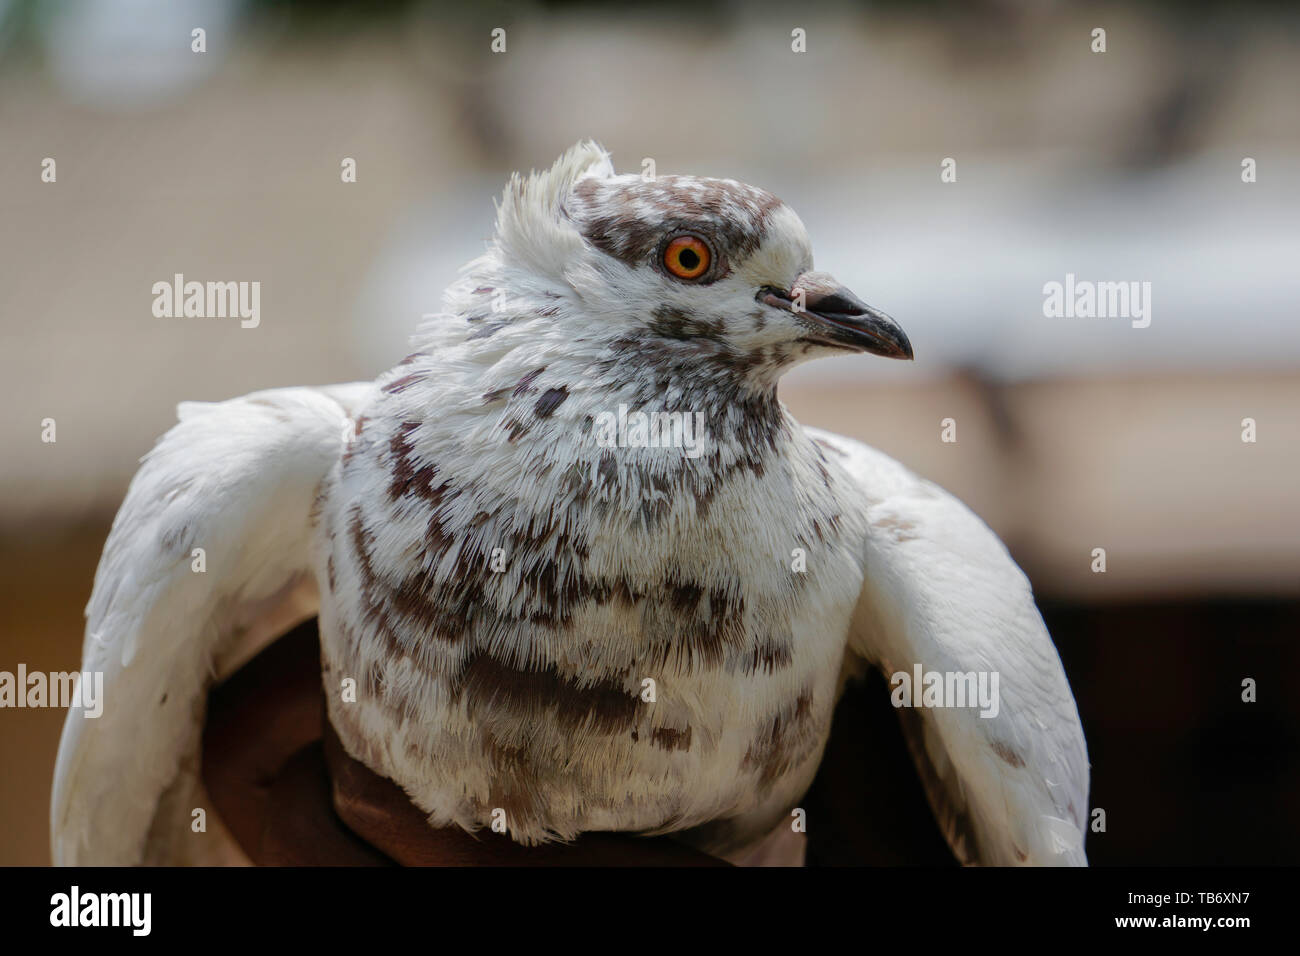 Full HD Red Eye White Pigeon in hand, flying moment, Bangladeshi pigeon Stock Photo